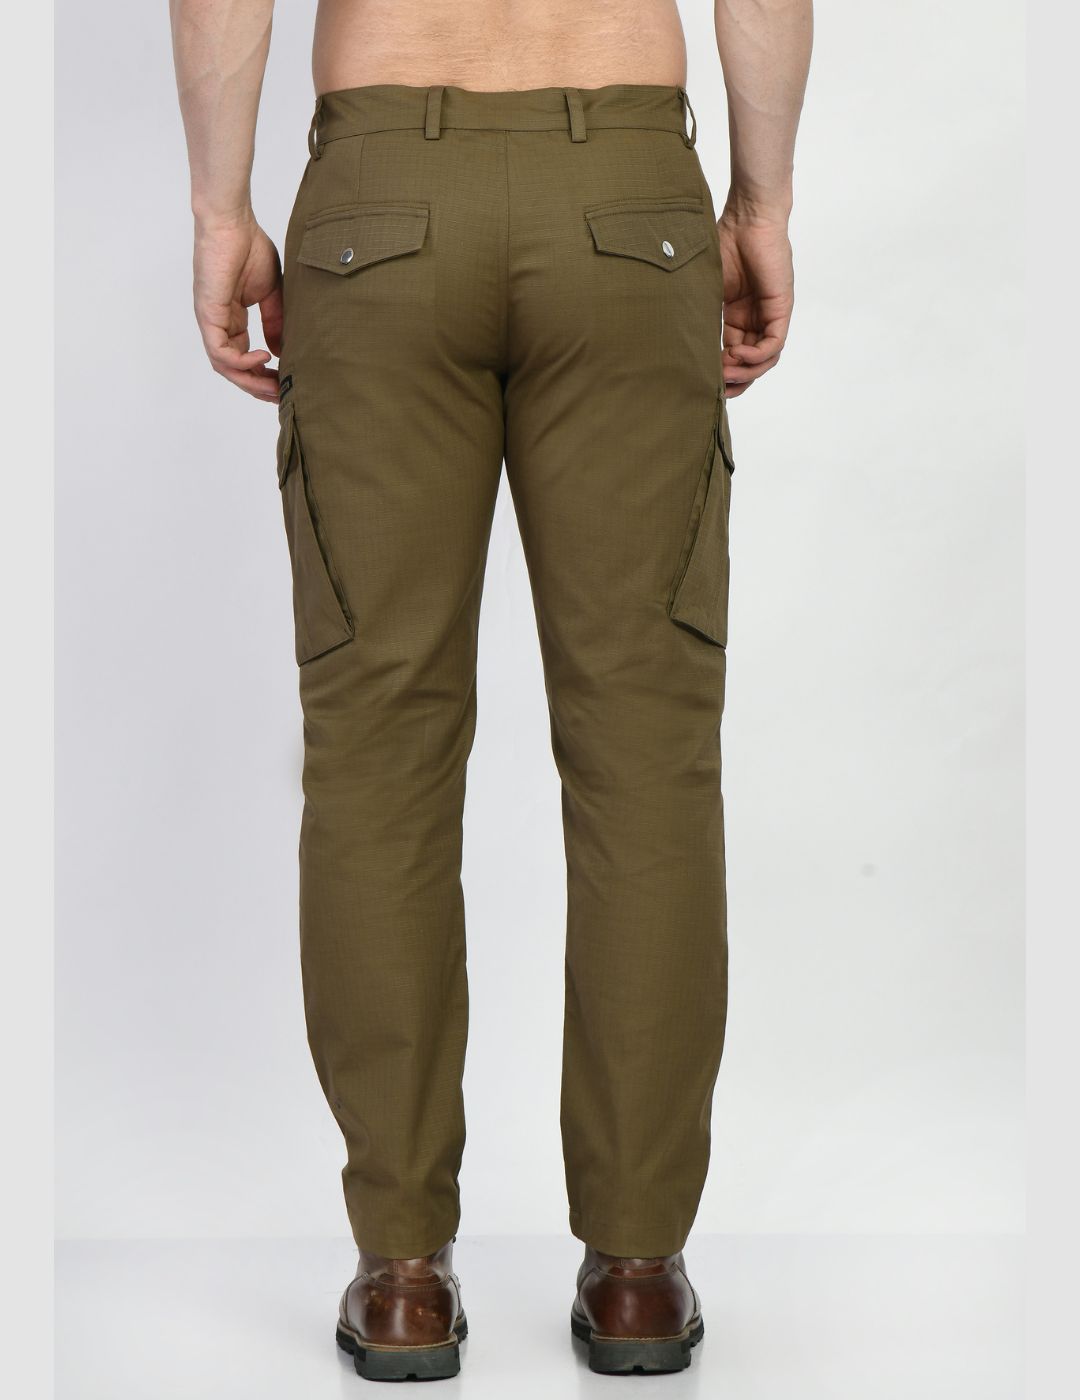 Buy Colva Mens Cotton Green Cargo Pant with Belt Size 36 at Amazonin